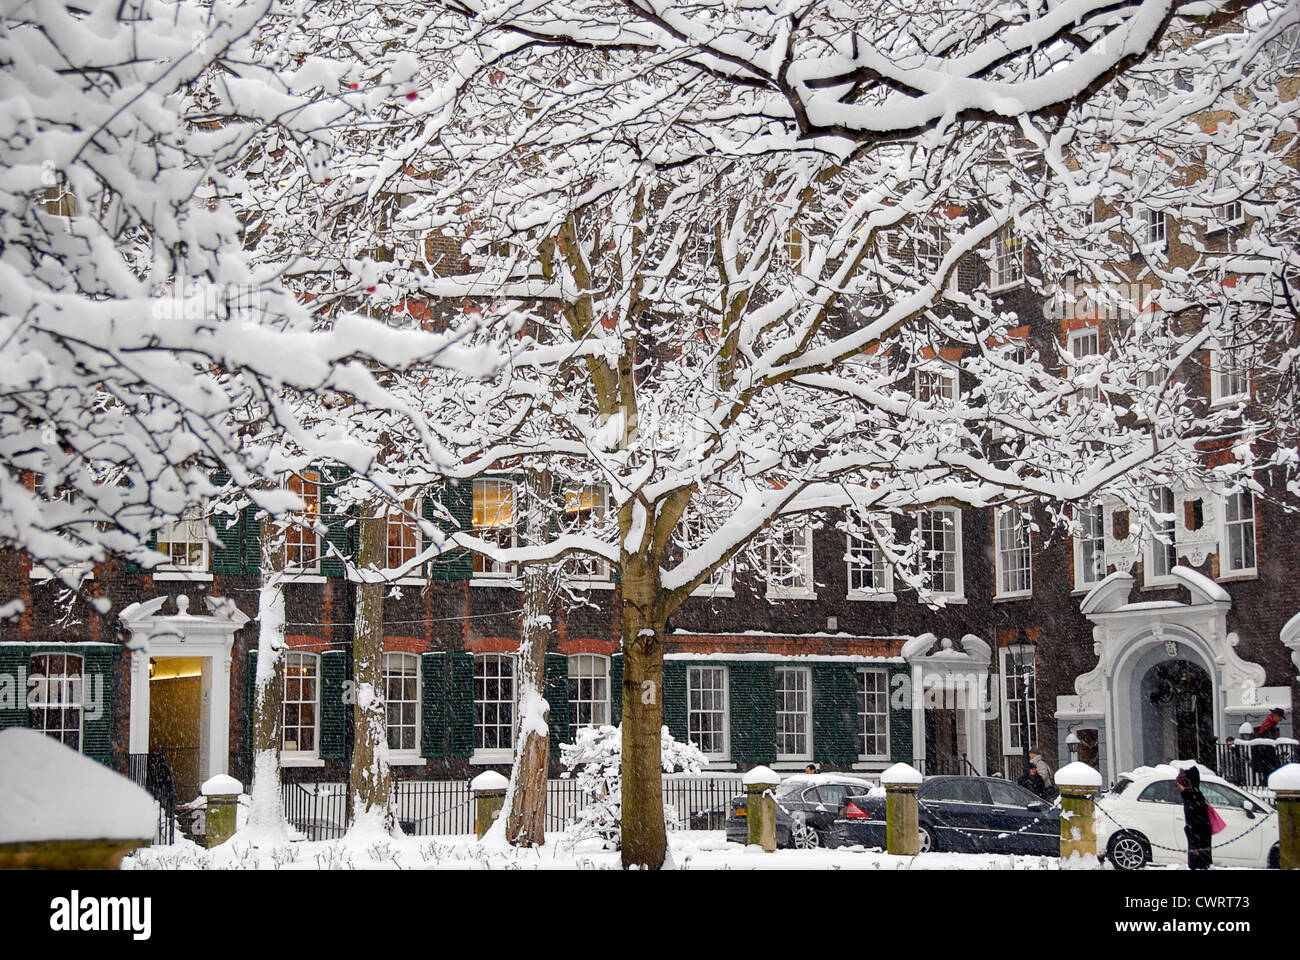 Snow-covered trees in New Square, London Stock Photo